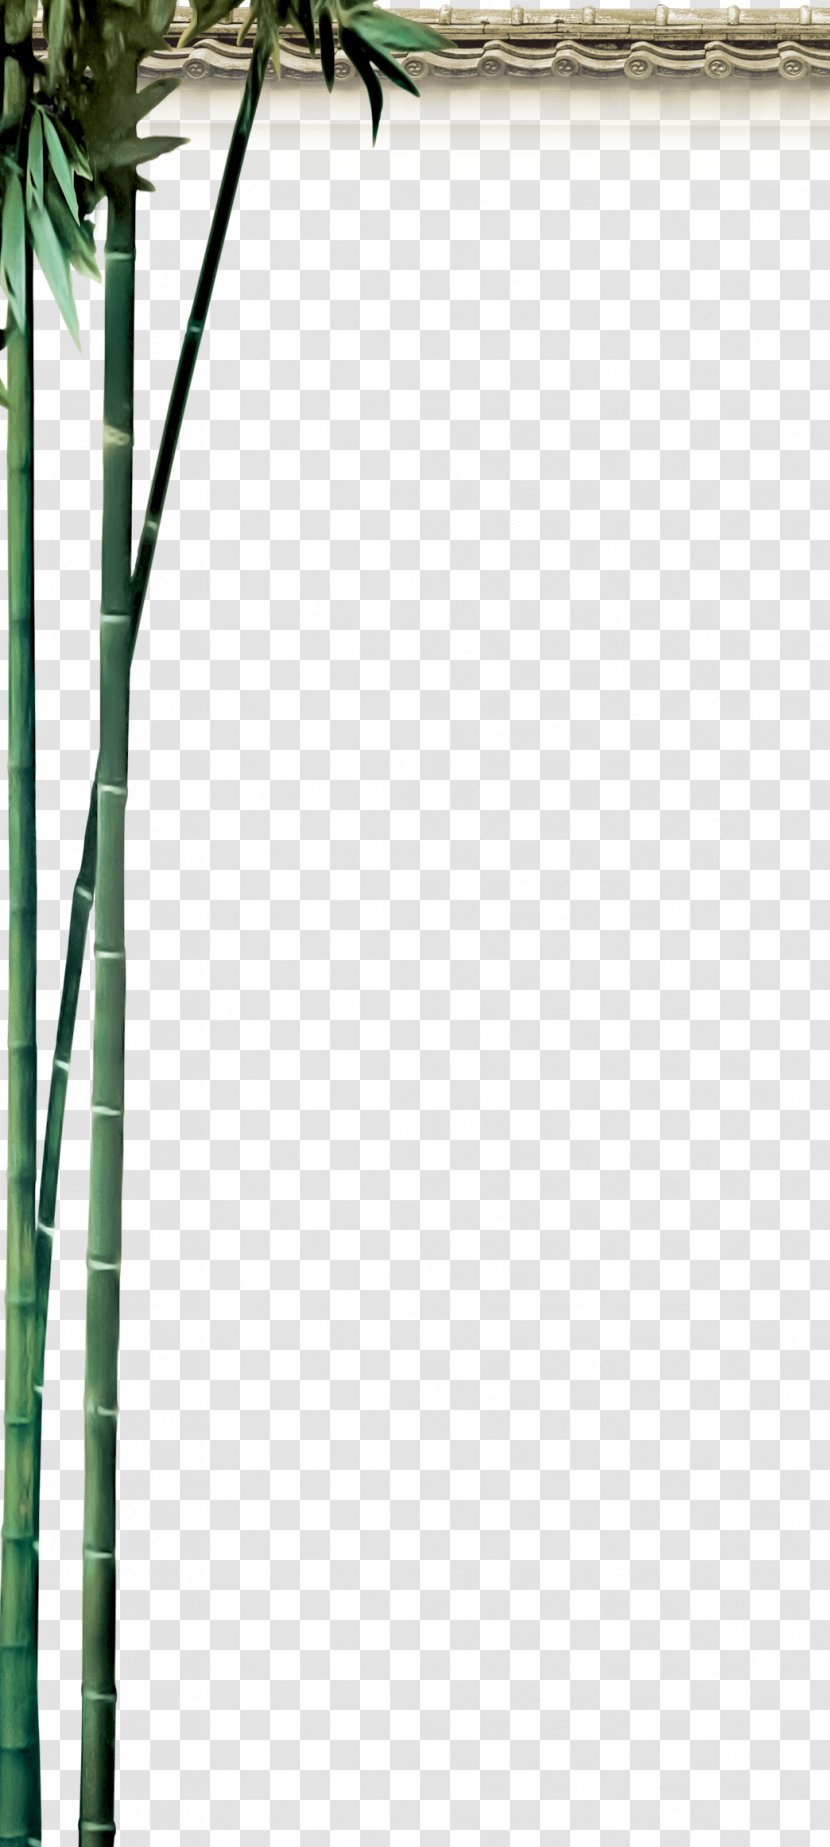 Bamboo Classical Element Pattern - Net - Elements Transparent PNG